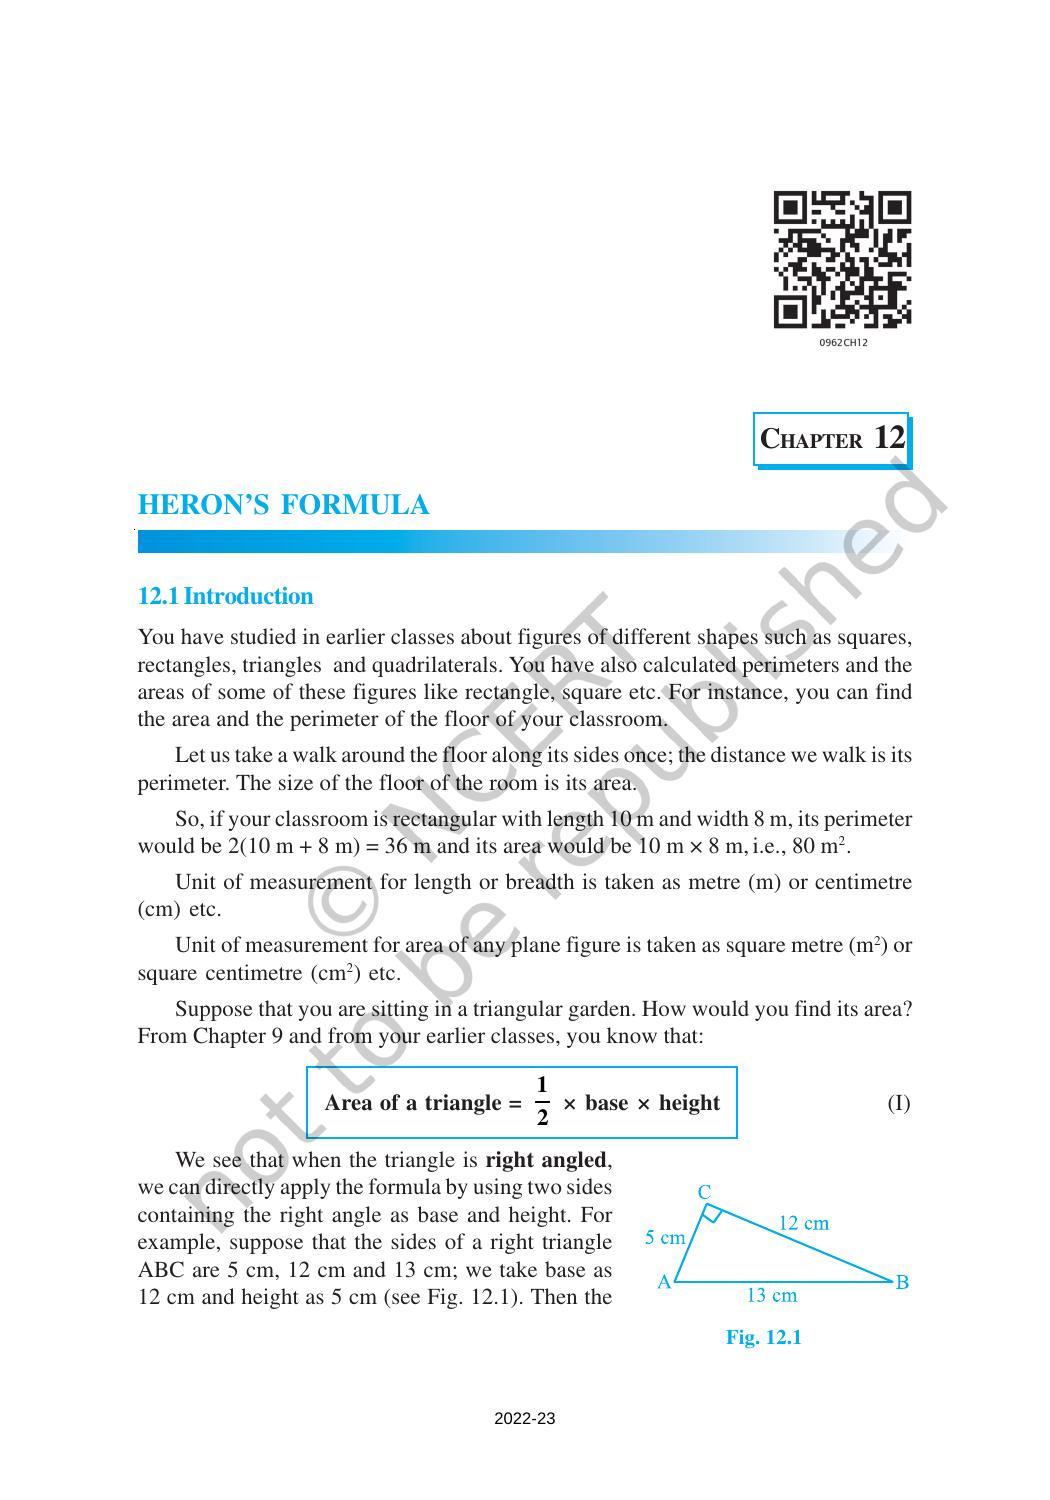 NCERT Book for Class 9 Maths Chapter 12 Heron’s Formula - Page 1